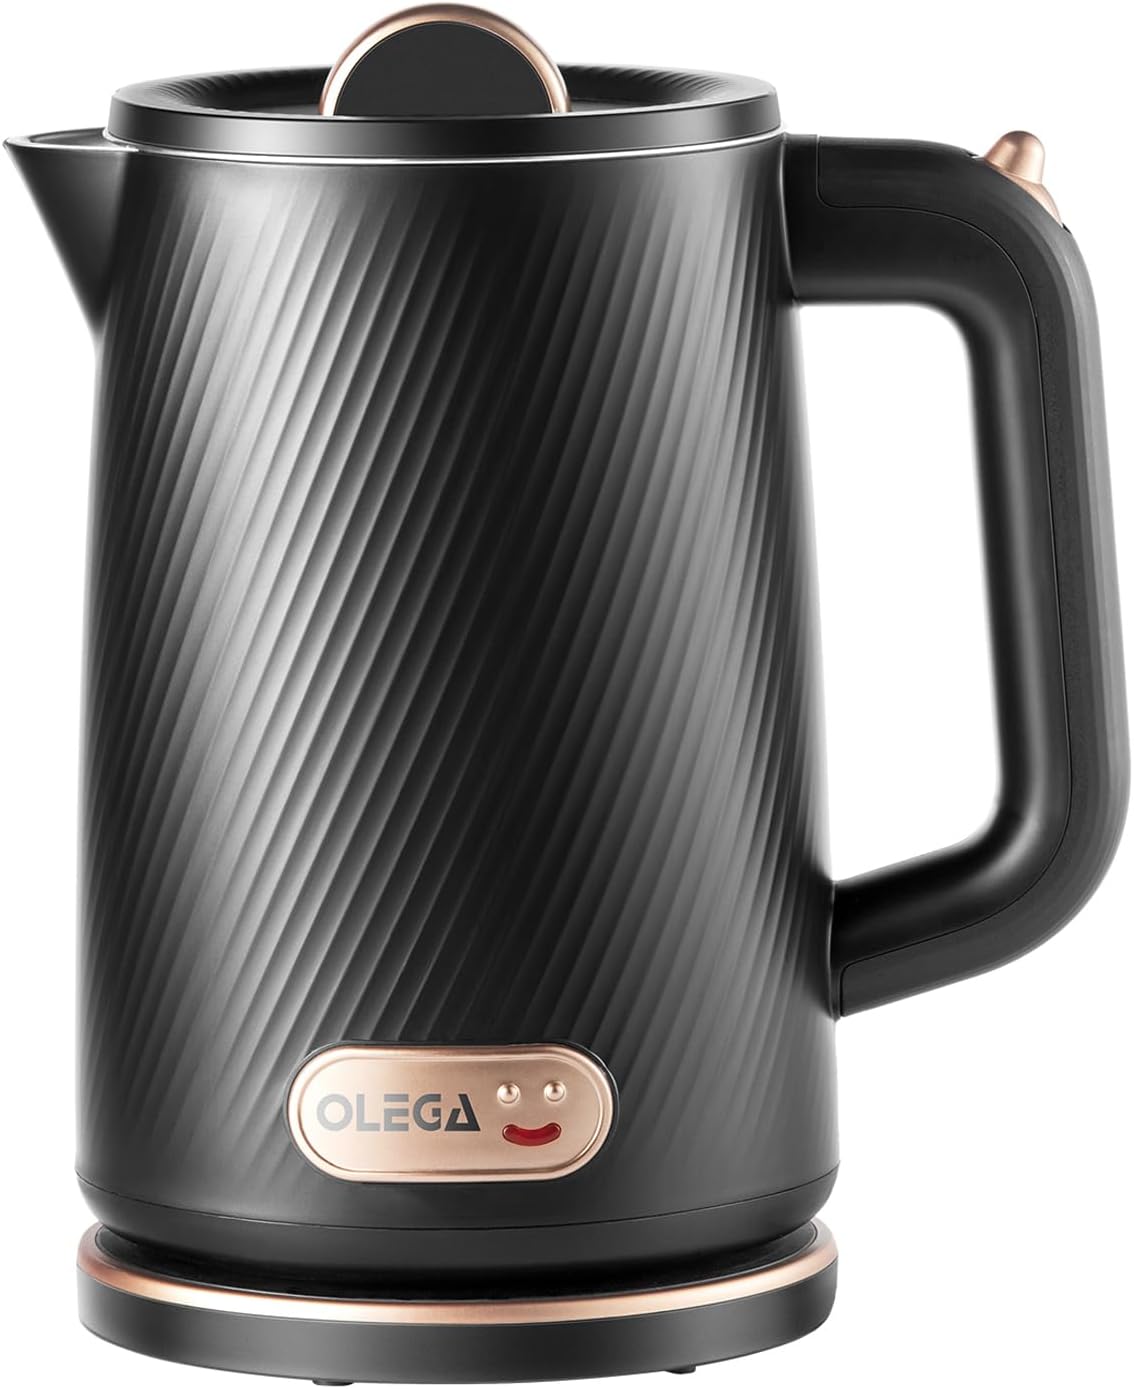 OLEGA Electric Kettle, 1.8L 1500W Hot Water Kettle Electric, Fast Boill BPA - Free Stainless Steel Electric Water Boiler & Heater, Cordless Electric Tea Kettle Teapot for Coffee, Black - Amazing Gadgets Outlet